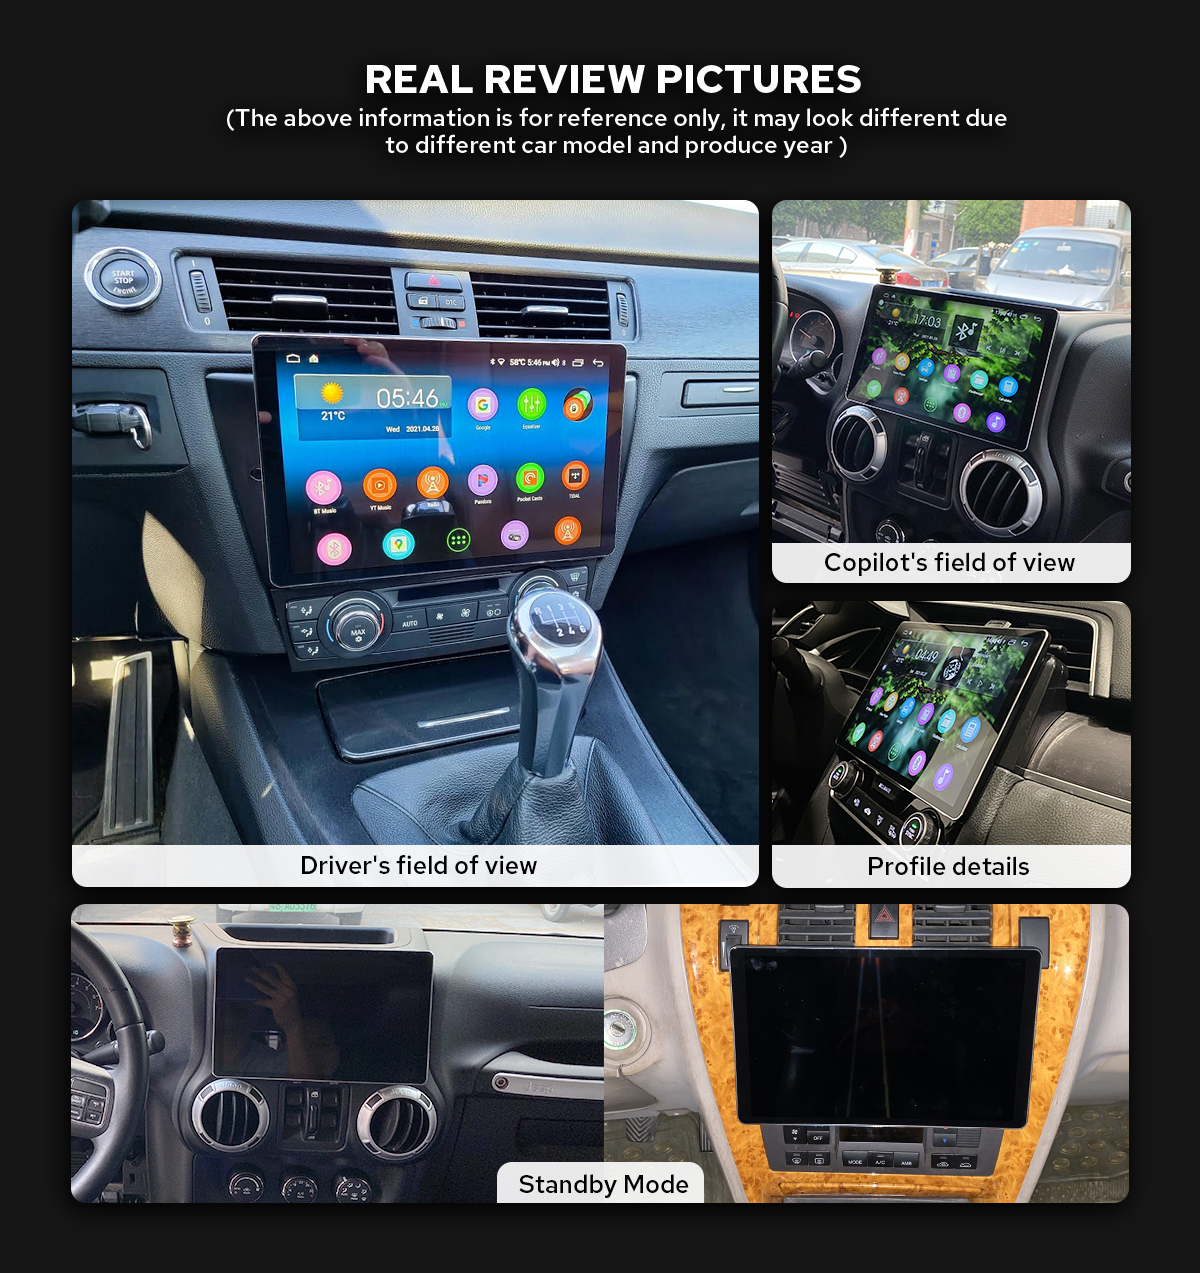 Joying 8 Inch Double Din Android Auto Head Unit With 1280X800 Full